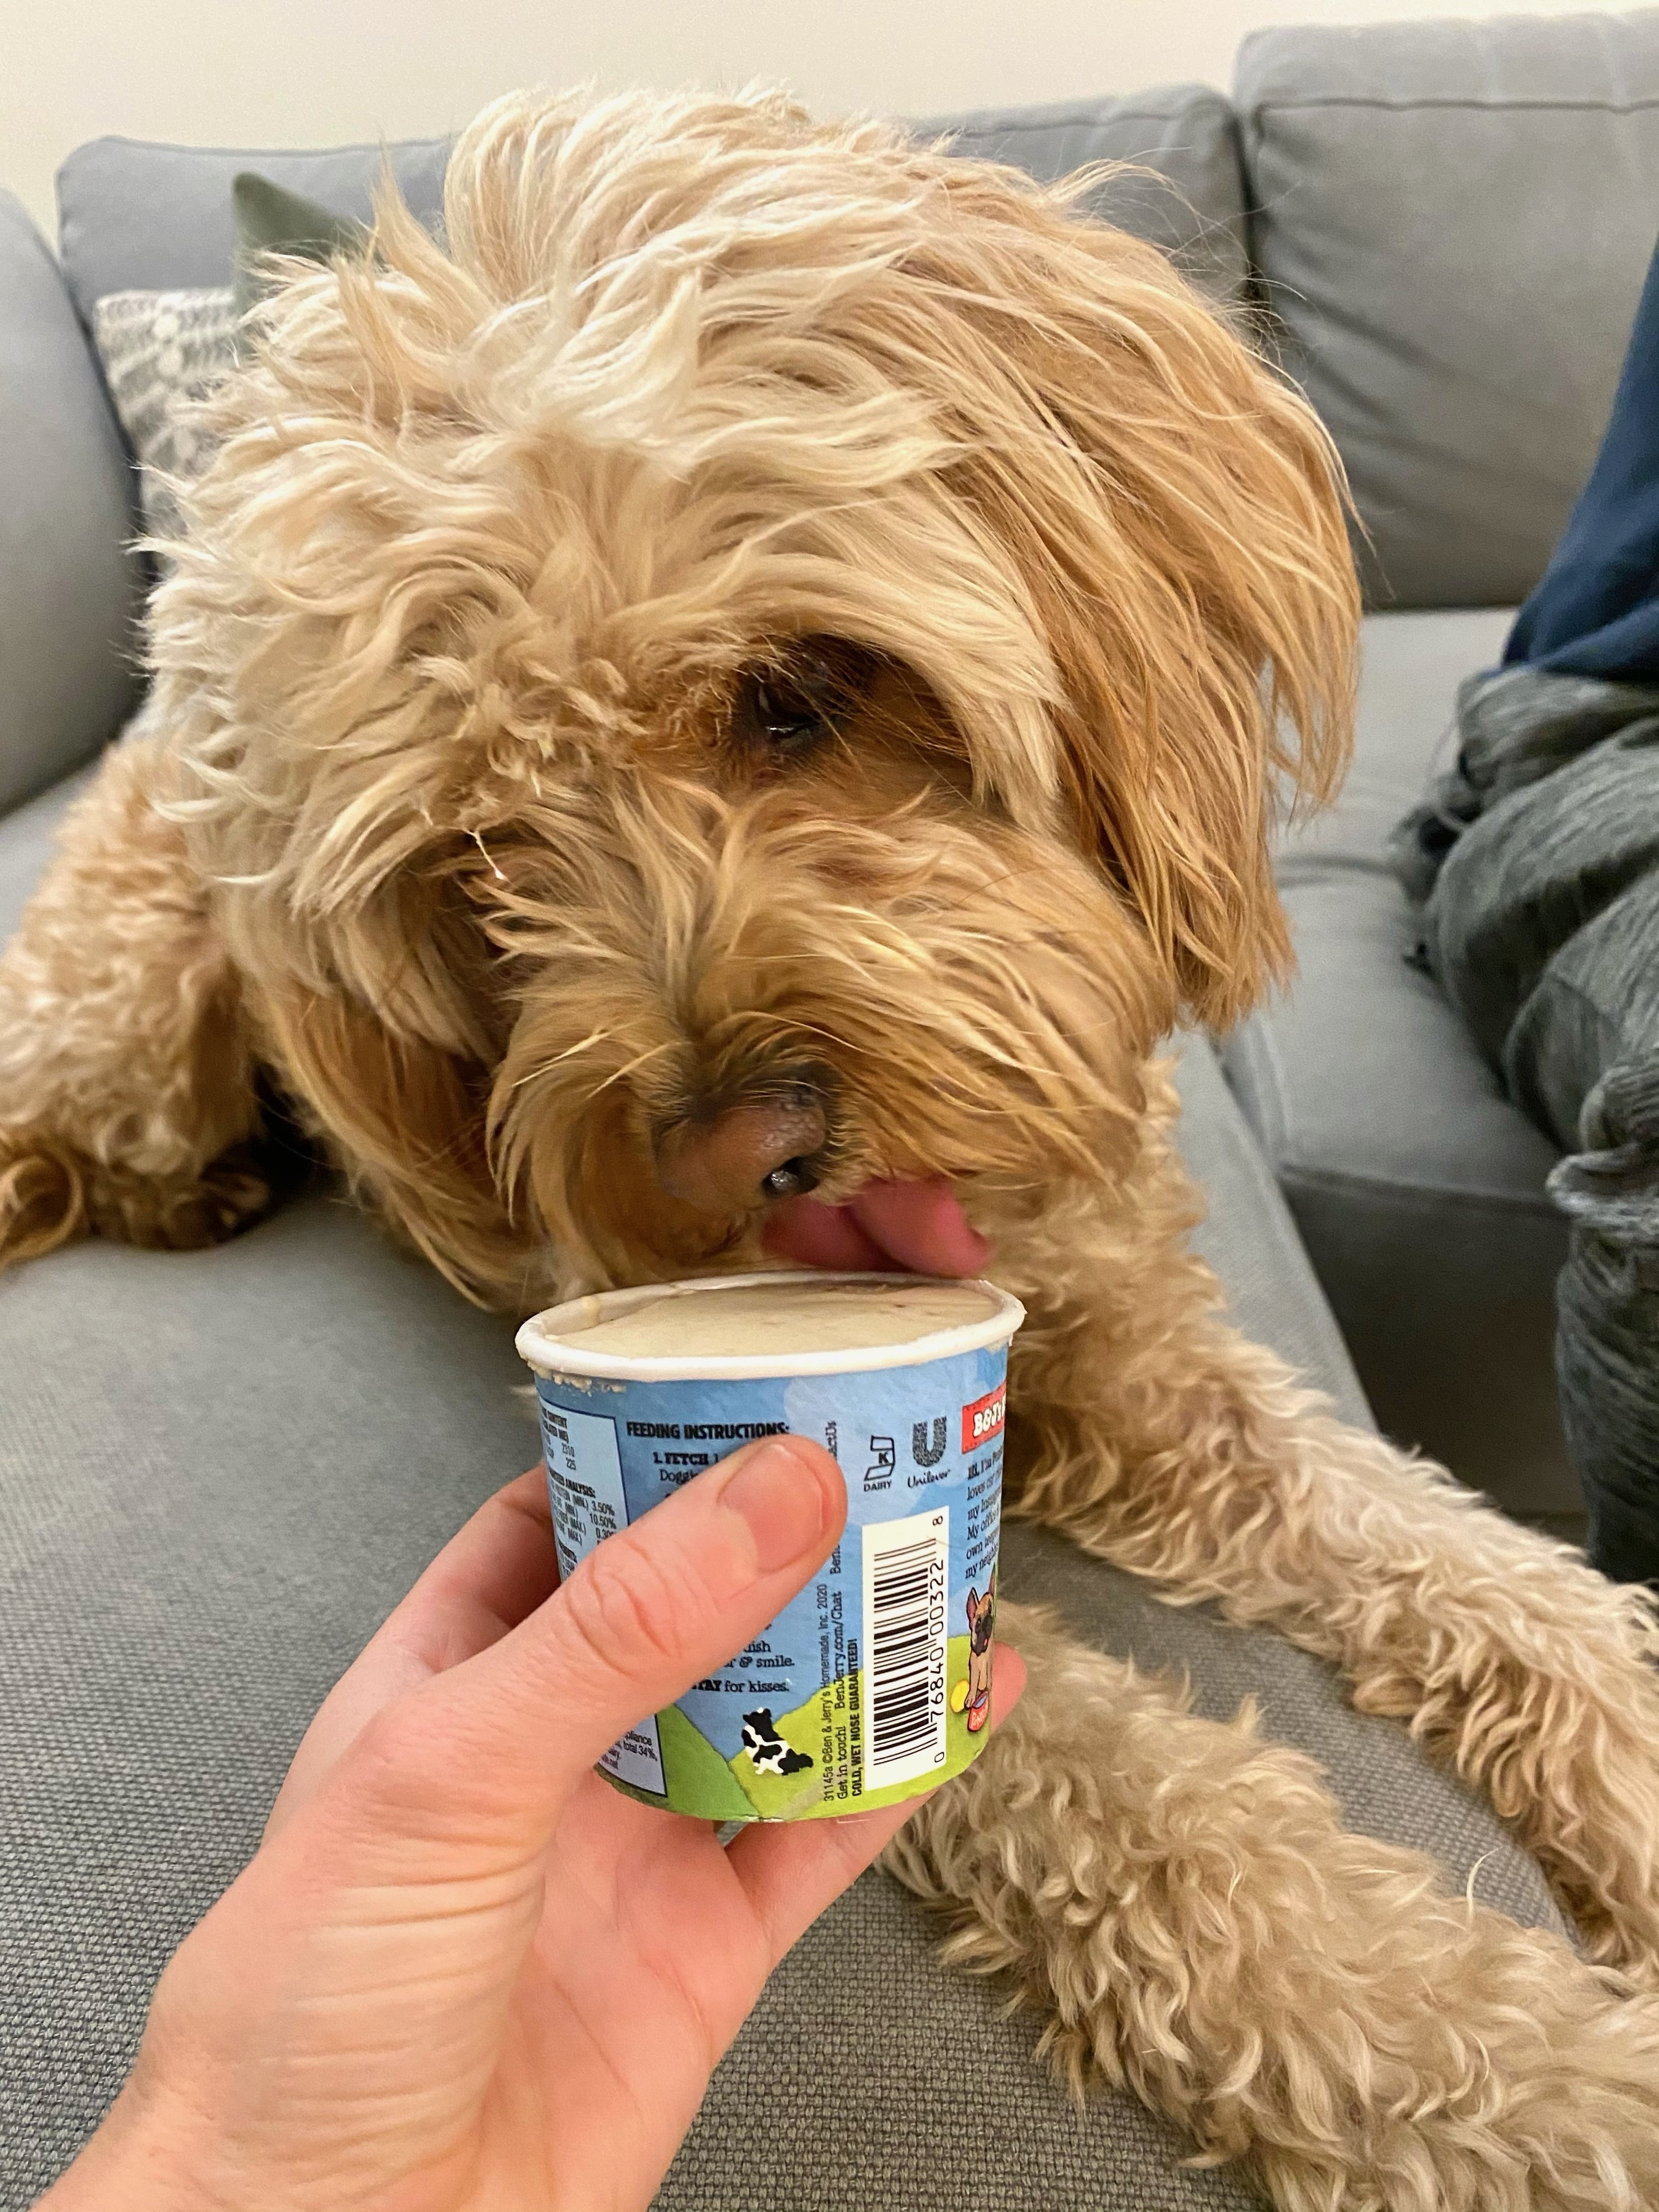 Hudson sticking his tongue in the doggy ice cream.